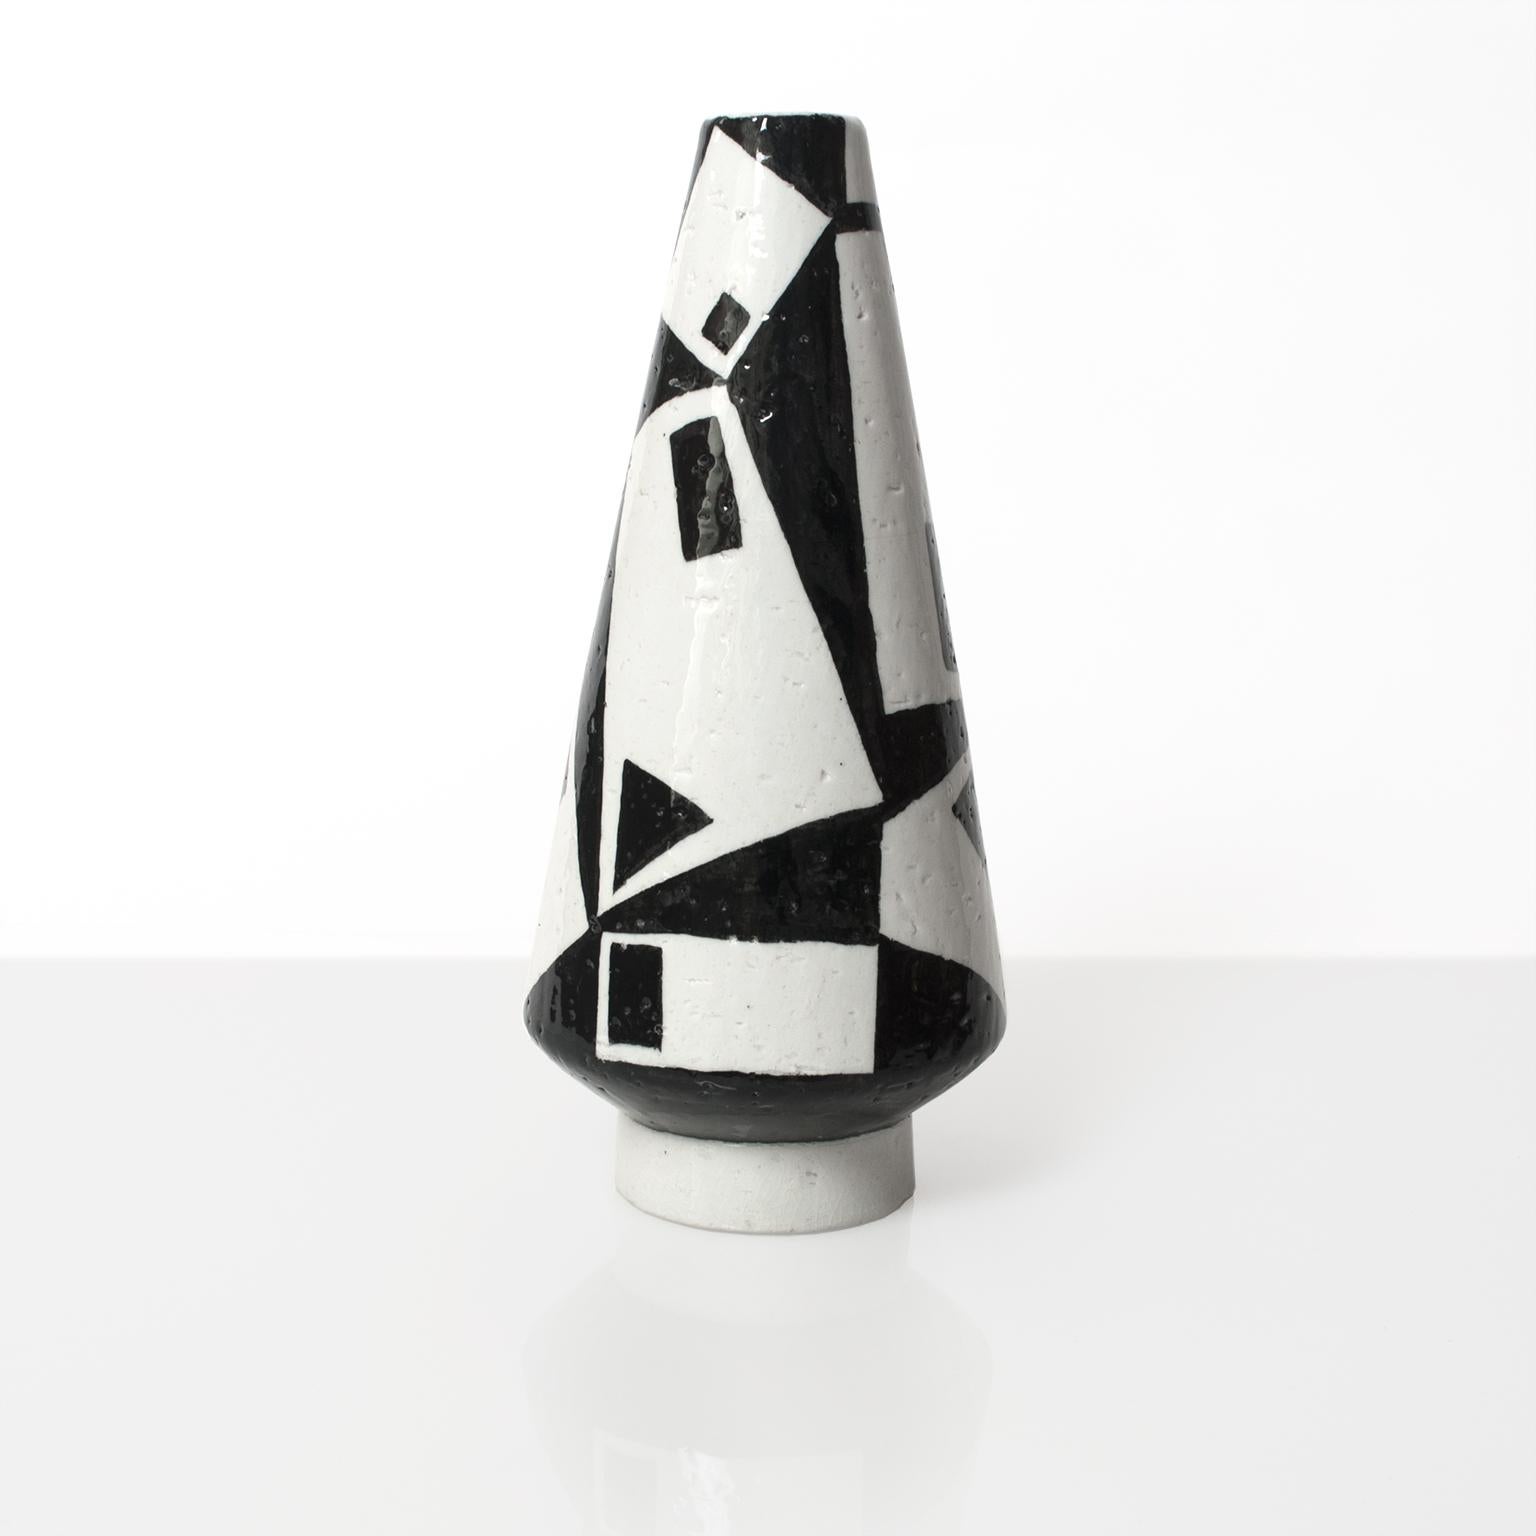 A unique Rorstrand studio ceramic vase with black and white abstract design by Vilhelm Berke Petersen, signed and dated on bottom.  

Petersen studied under artists Paul Klee and Wassily Kandinsky at Bauhaus Dessau from 1930-1931. 

Dimensions: